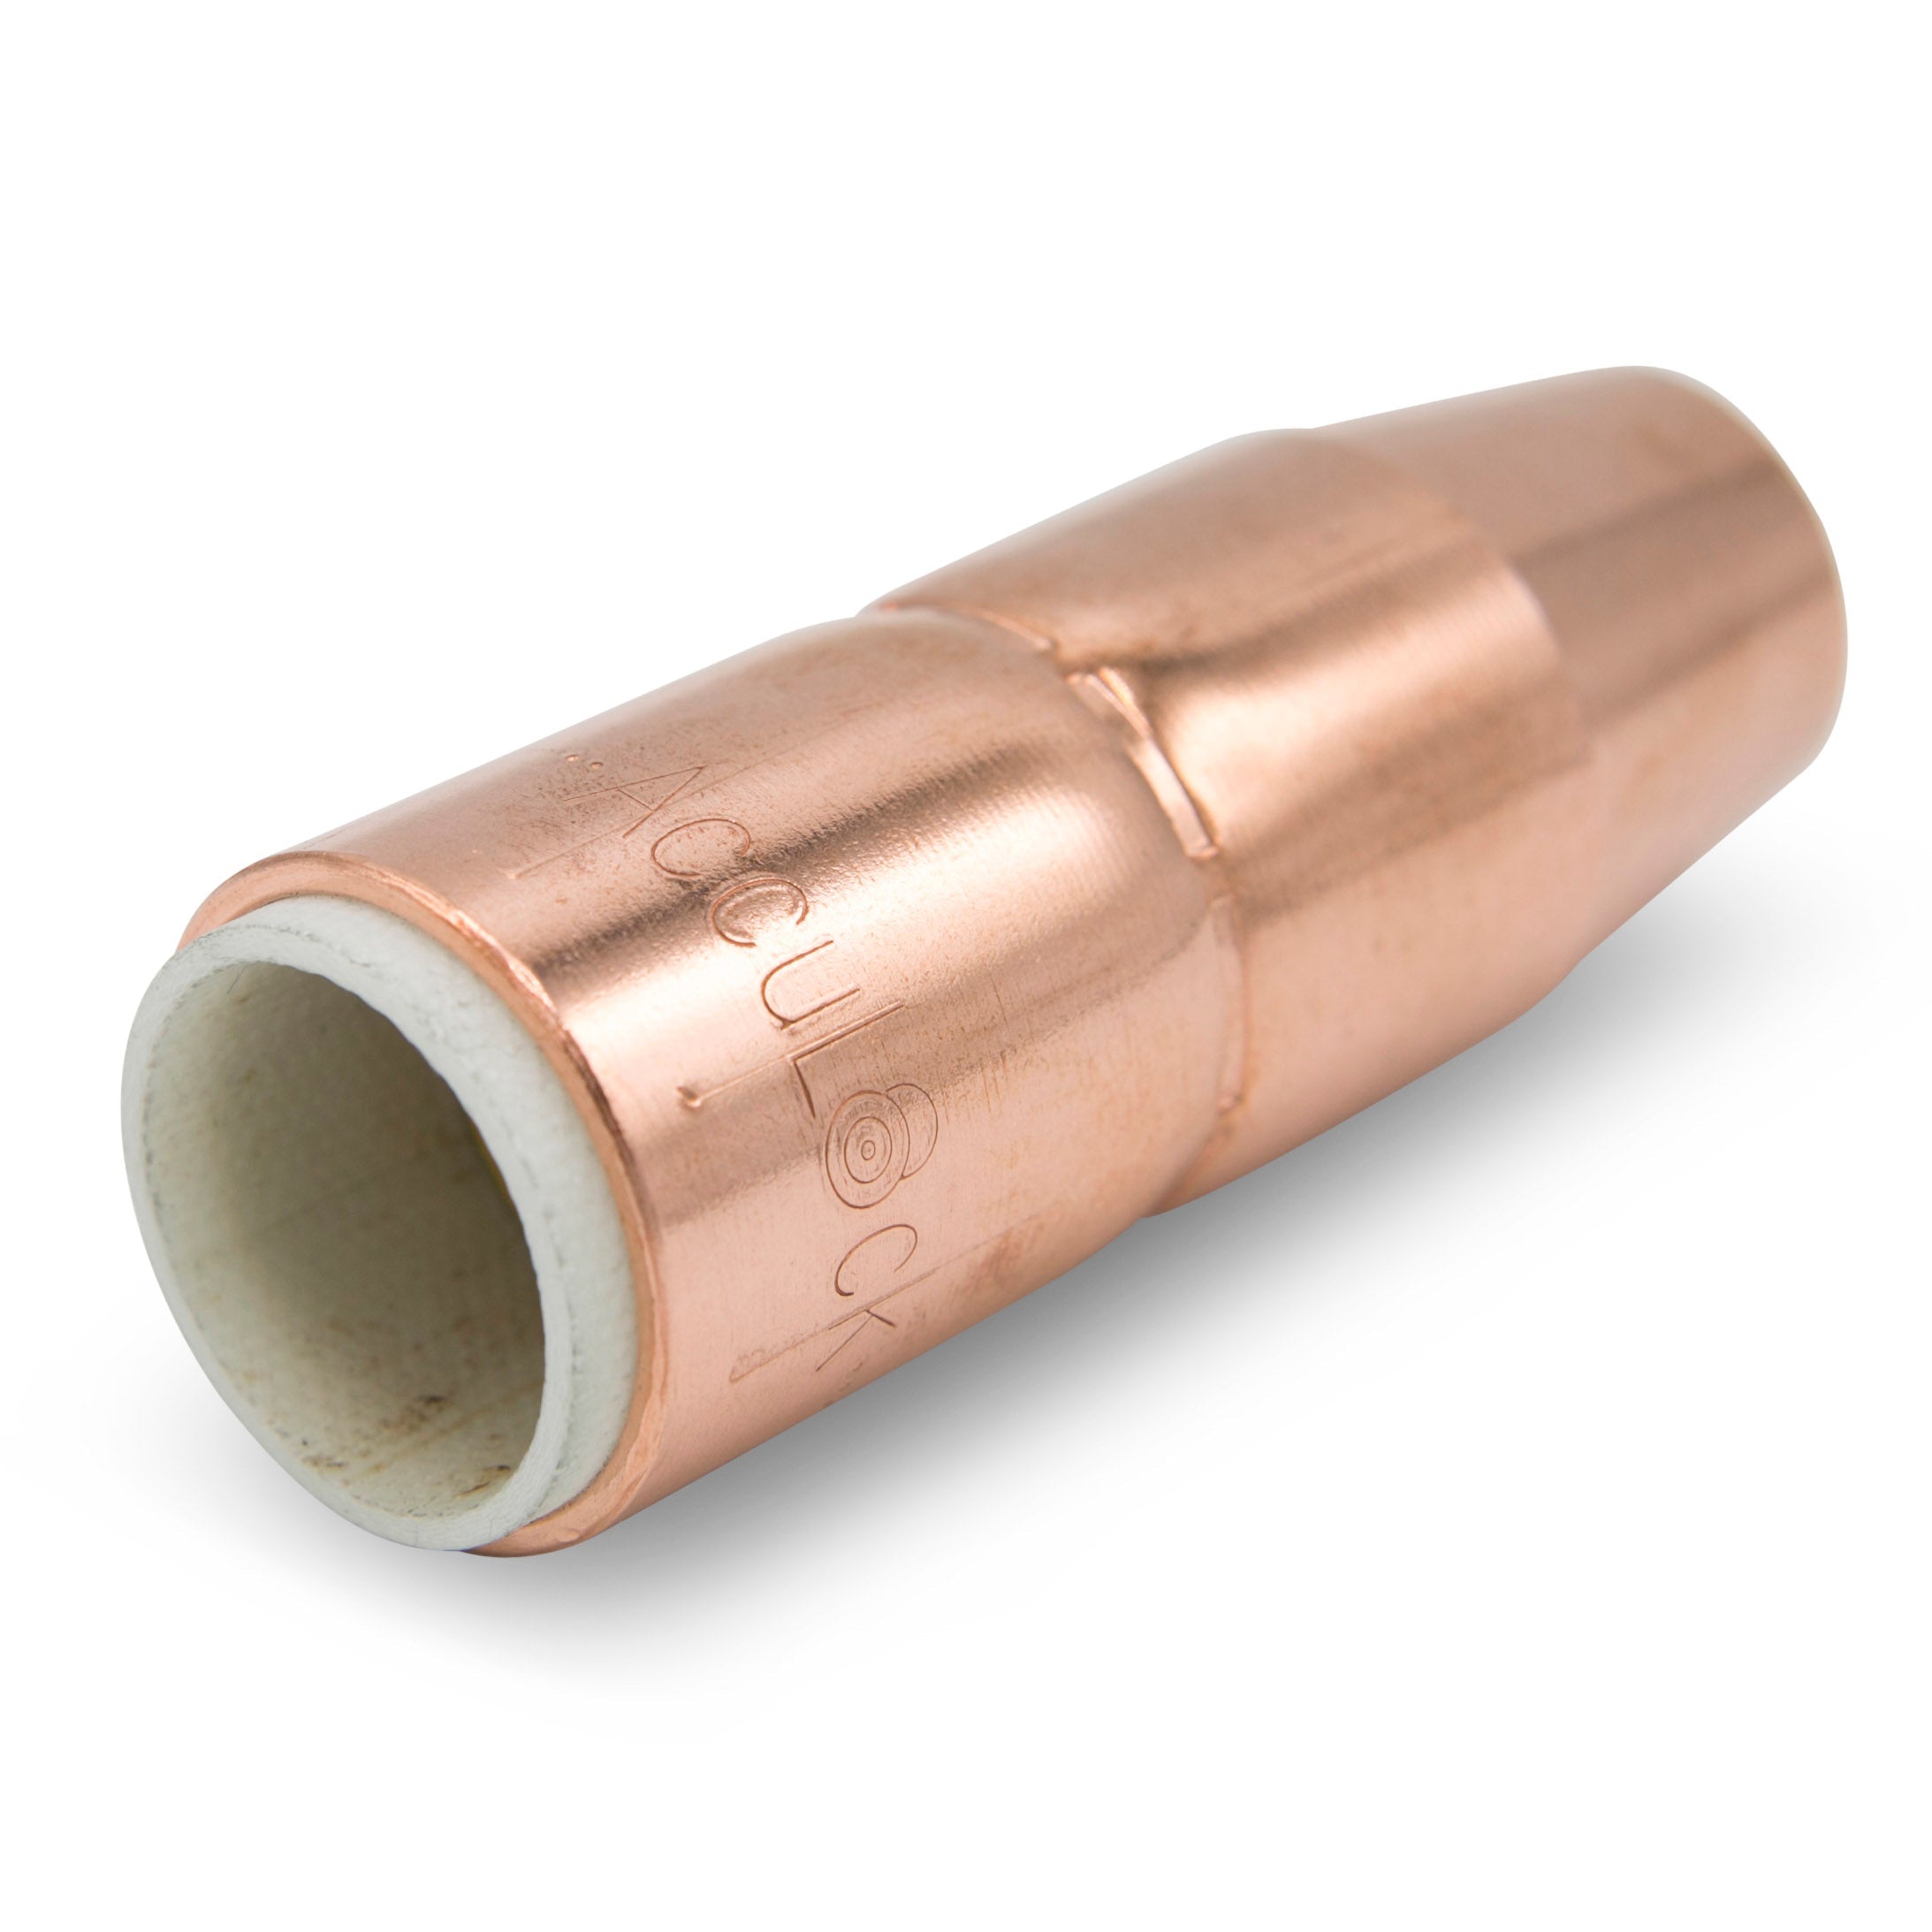 Miller AccuLock S Large Thread-On Copper Nozzle - N-A5814CM